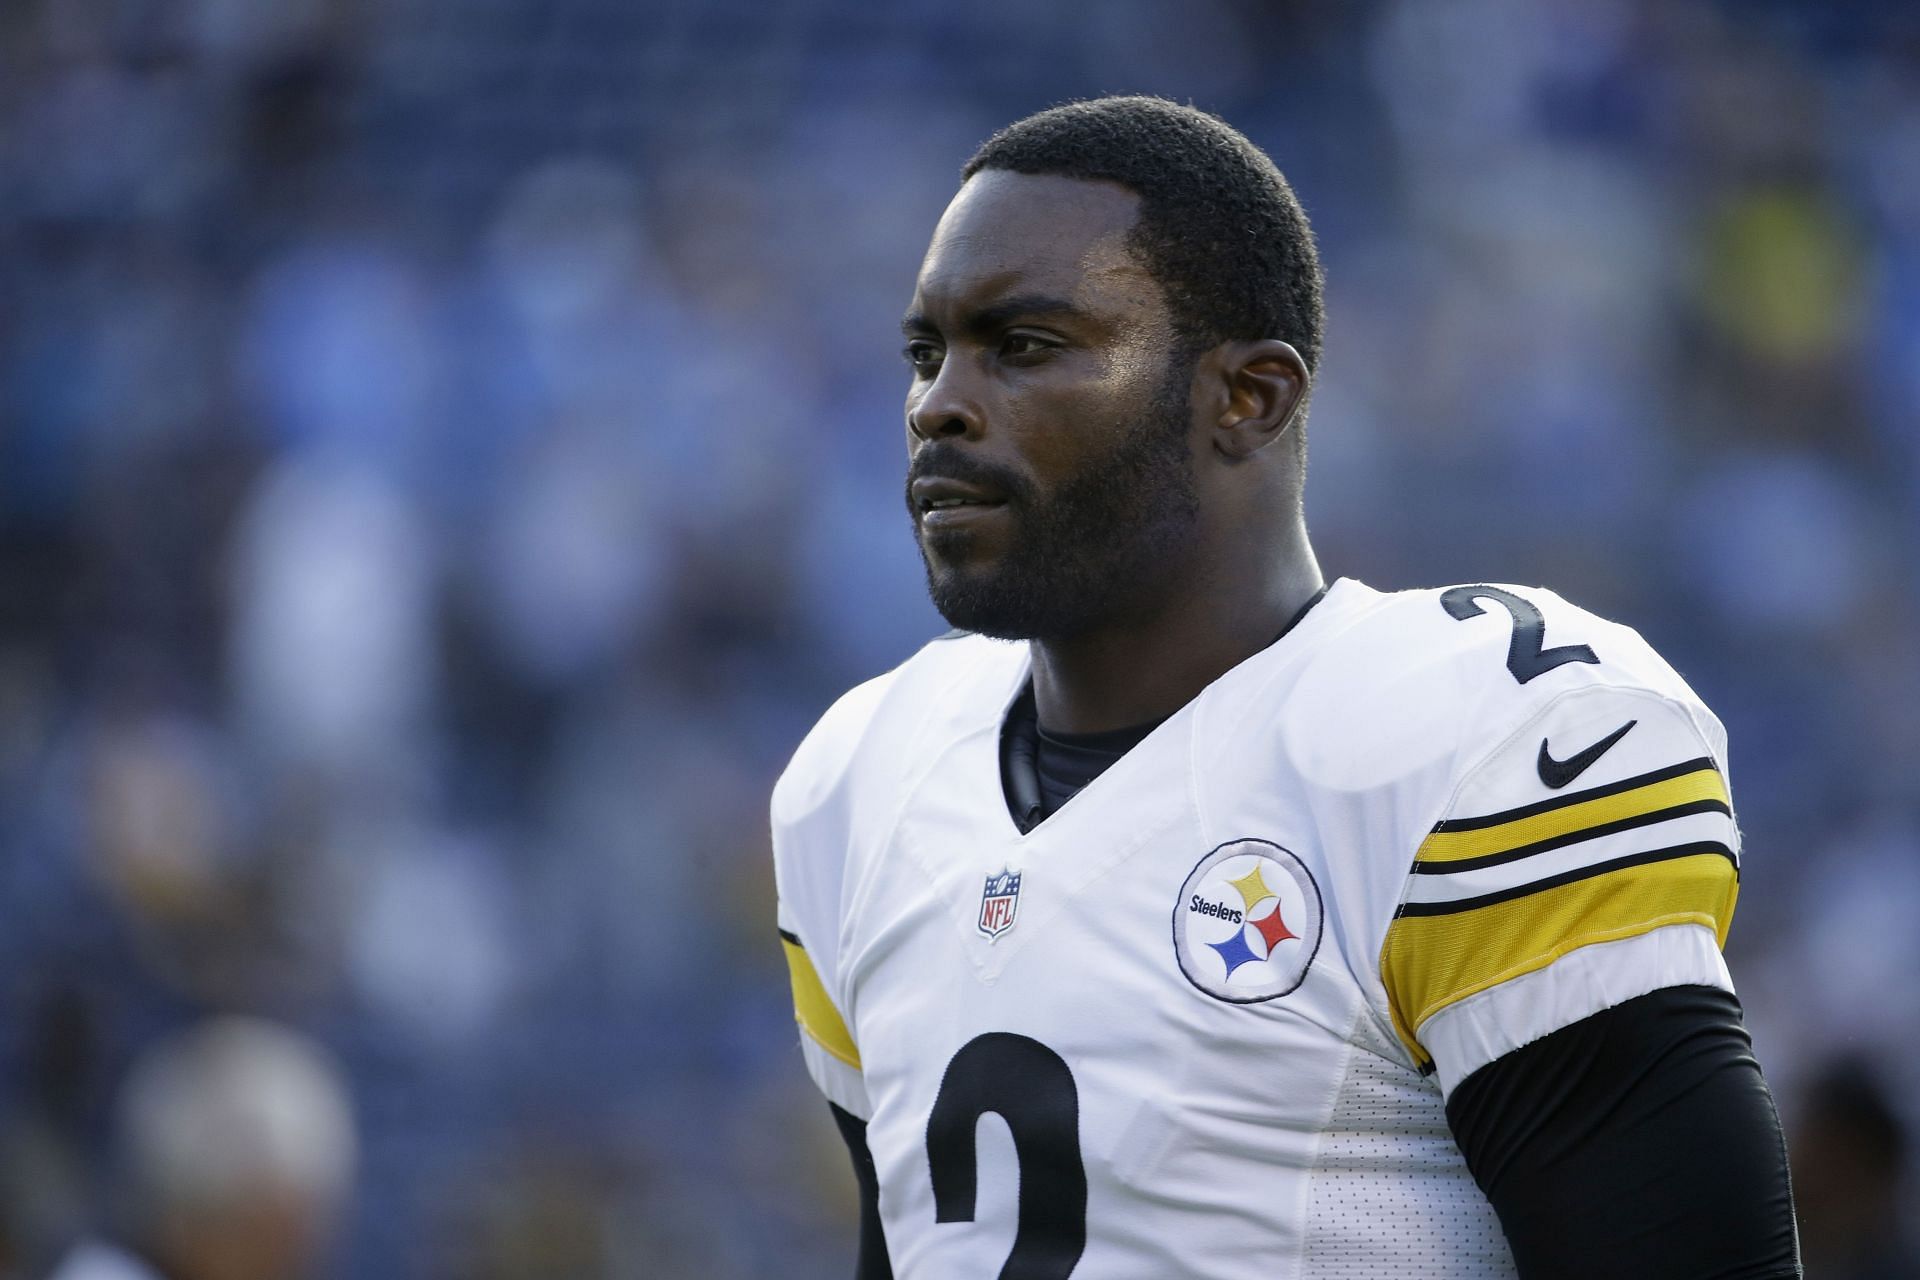 Michael Vick - Pittsburgh Steelers v San Diego Chargers